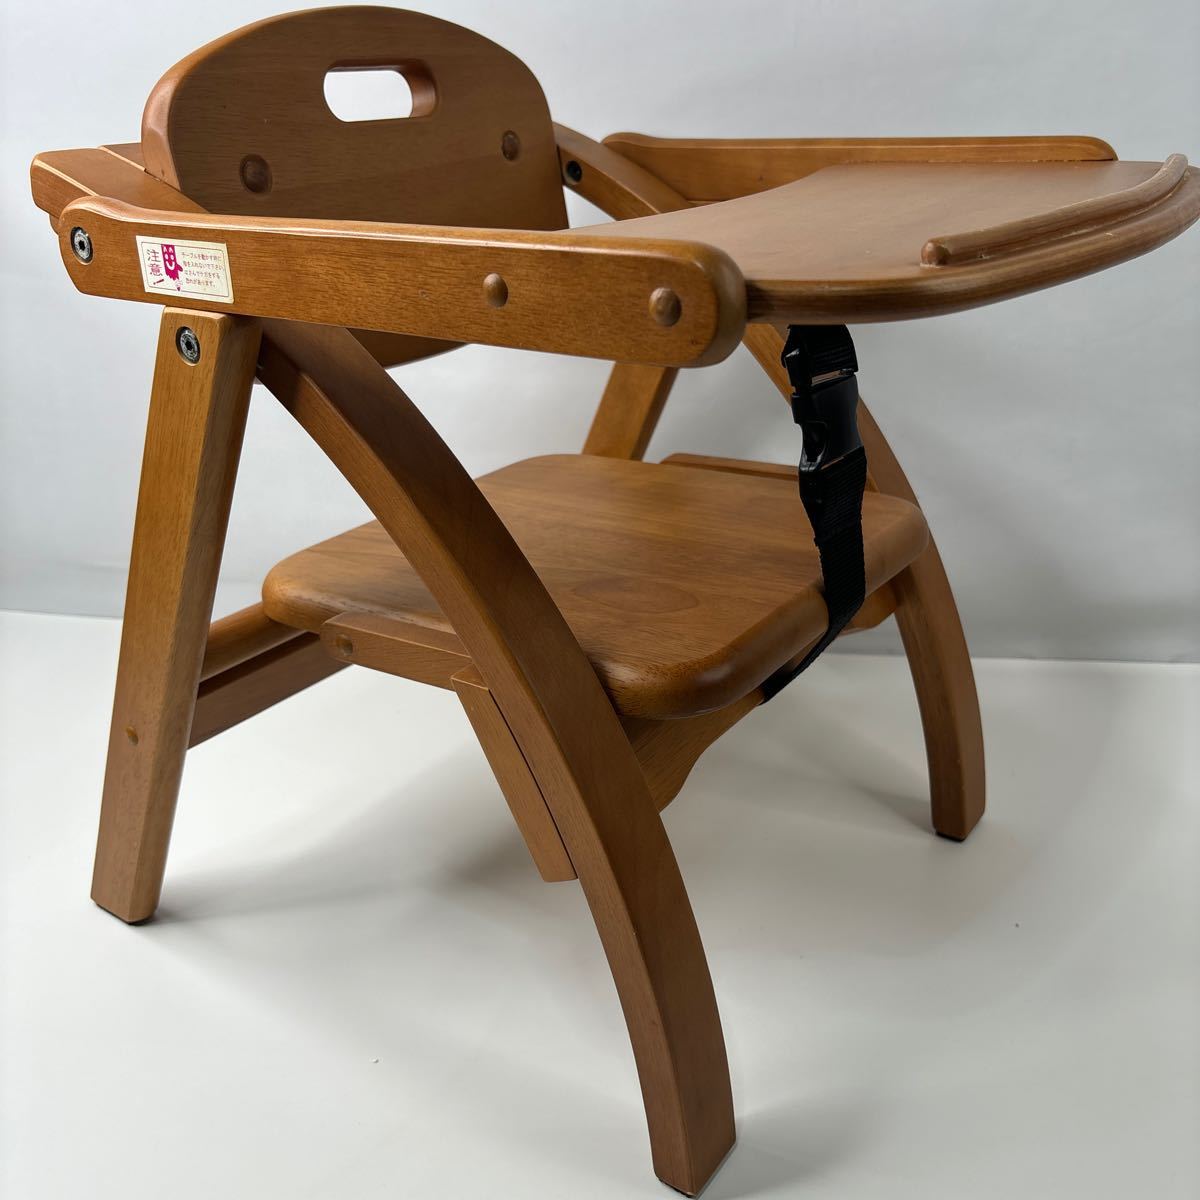  baby chair Arch Low Chair arch low chair Yamato shop folding table attaching child child wooden chair (570)